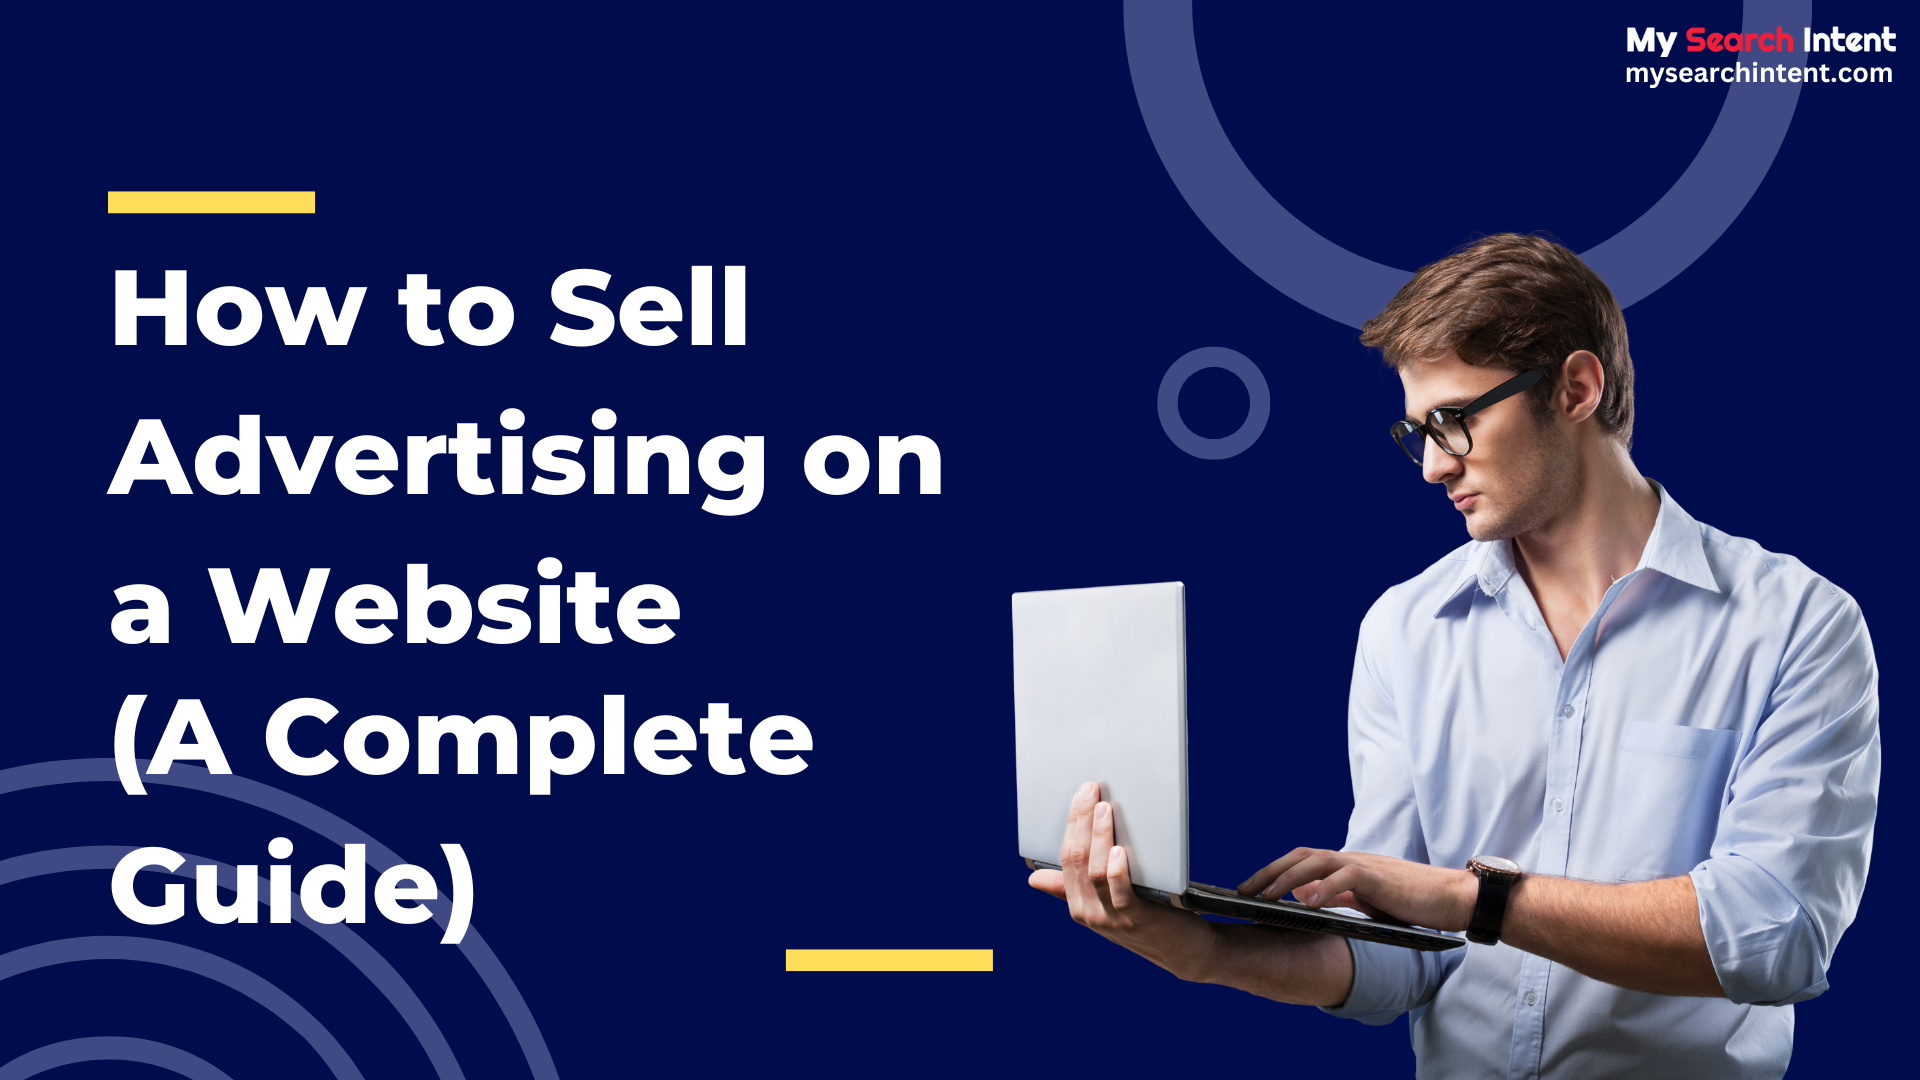 How to Sell Advertising on a Website